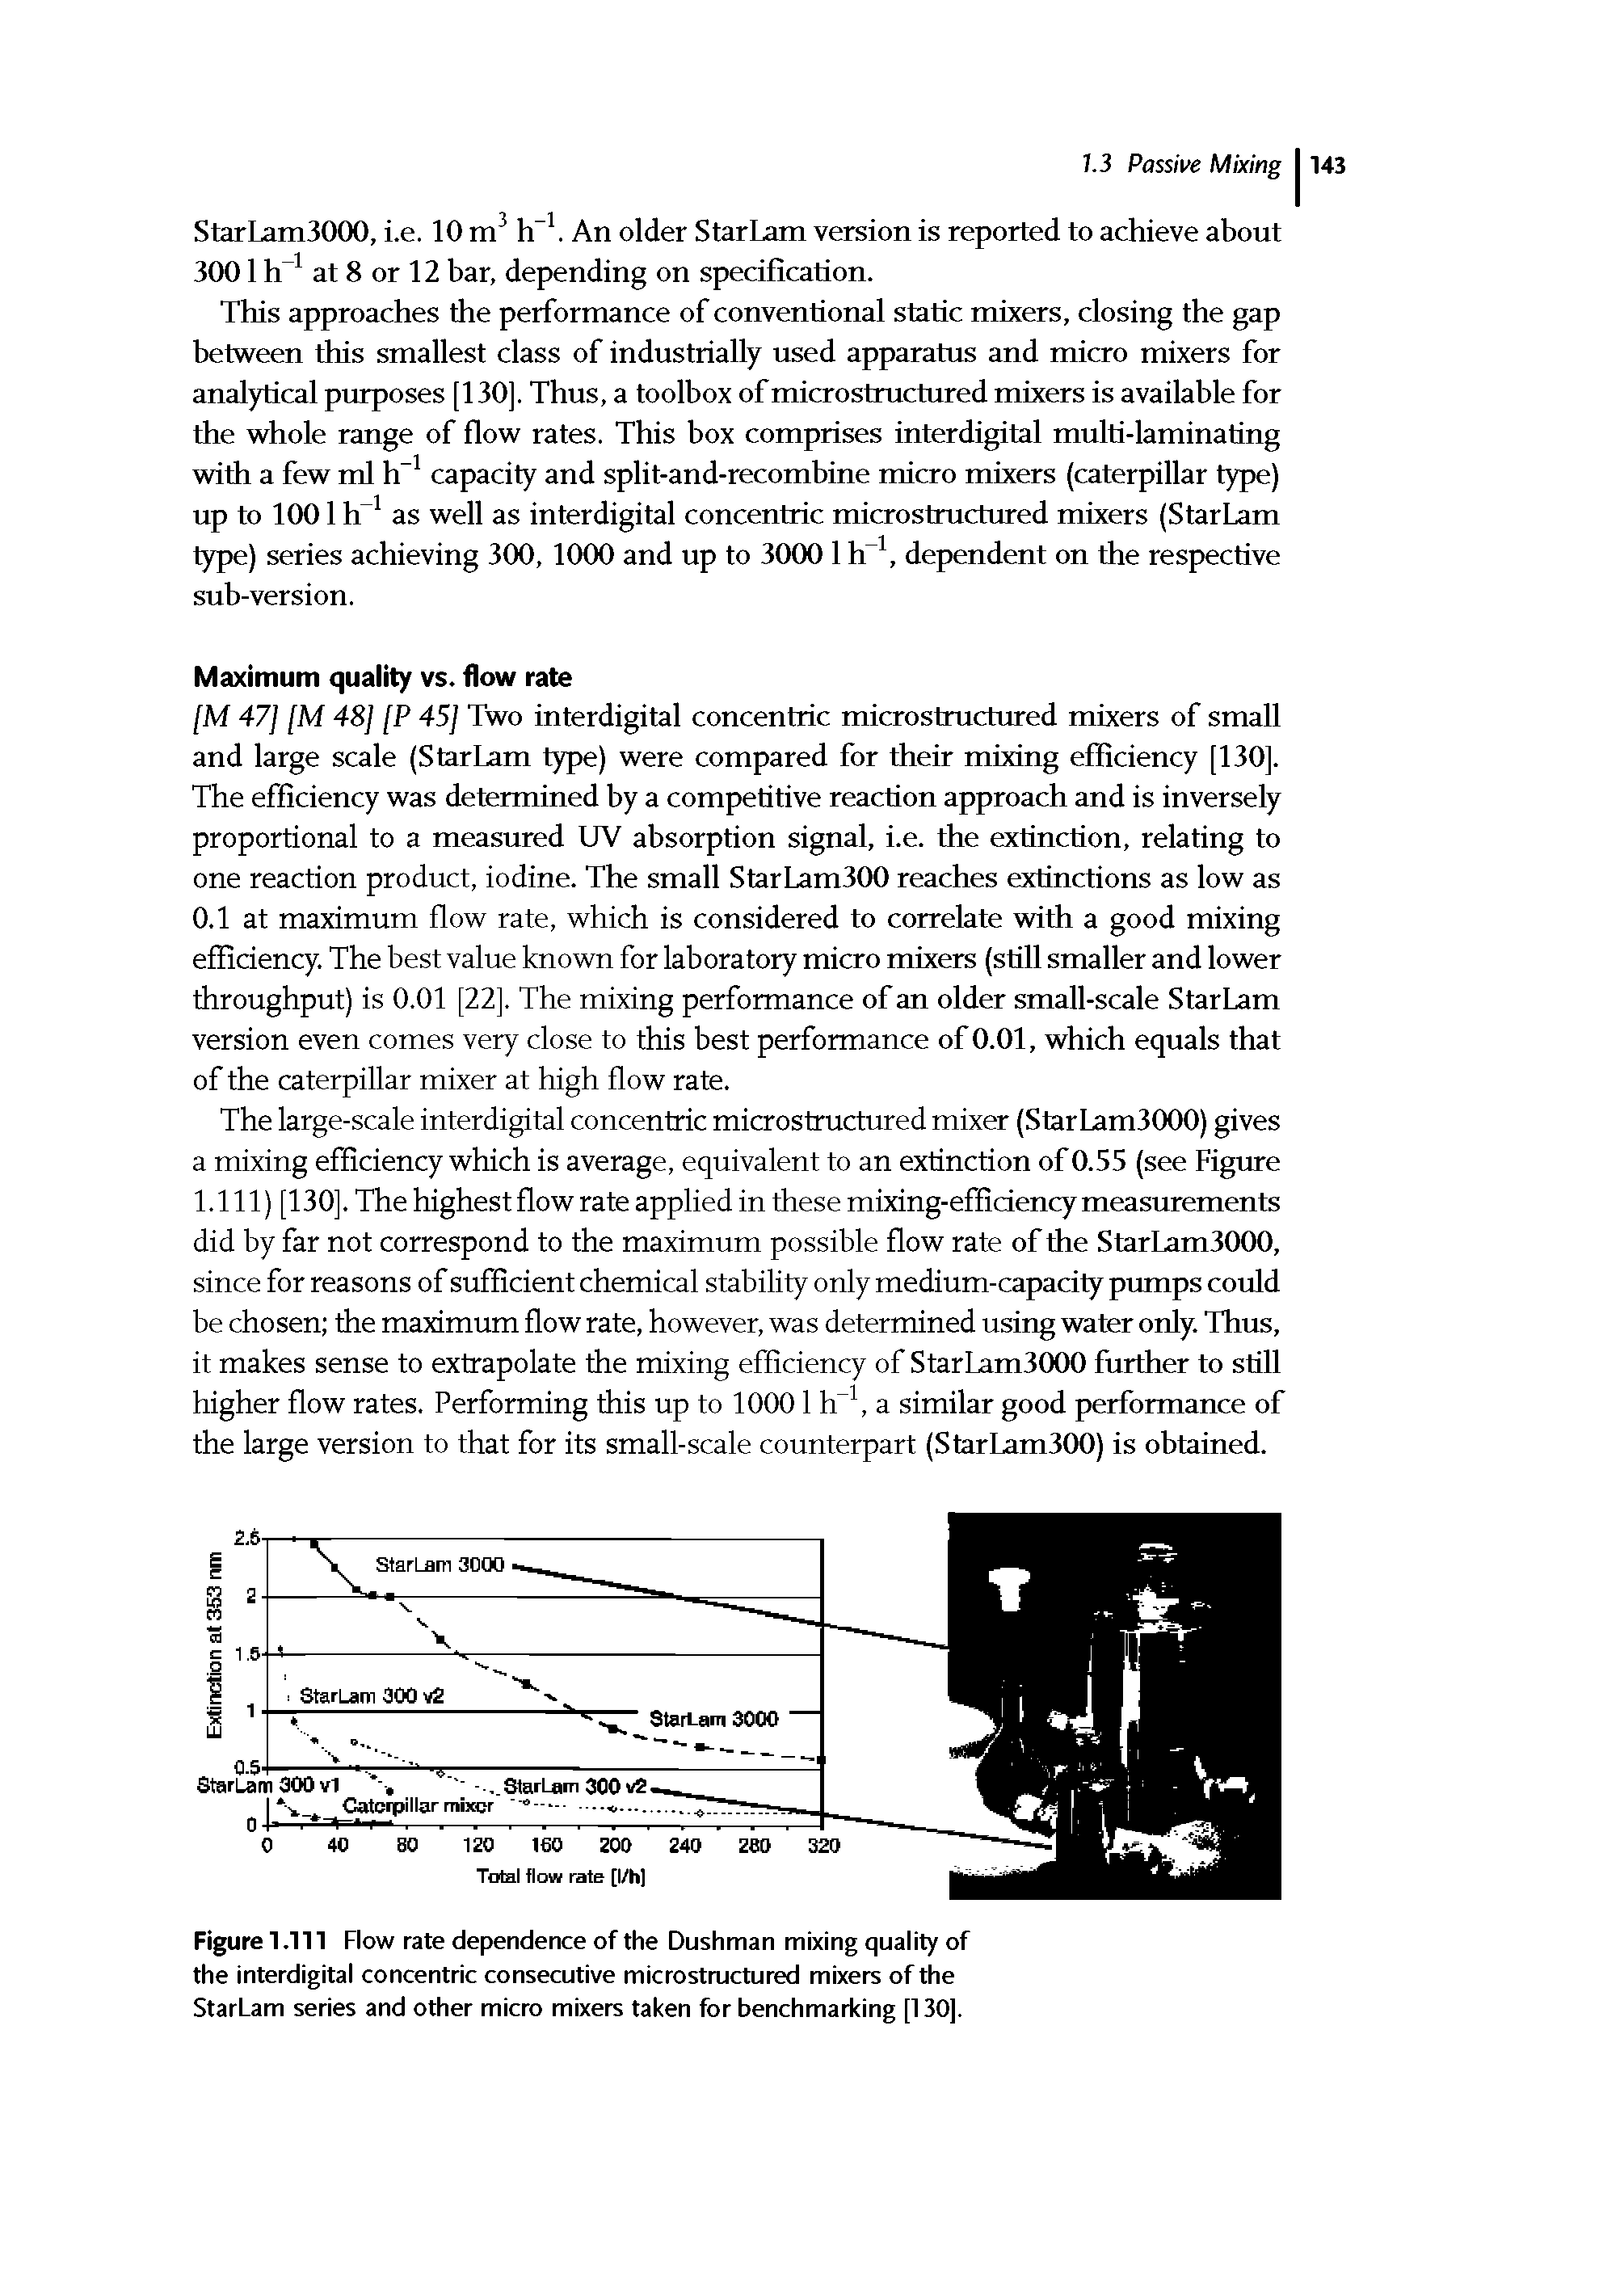 Figure 1.111 Flow rate dependence of the Dushman mixing quality of the interdigital concentric consecutive microstructured mixers of the StarLam series and other micro mixers taken for benchmarking [130].